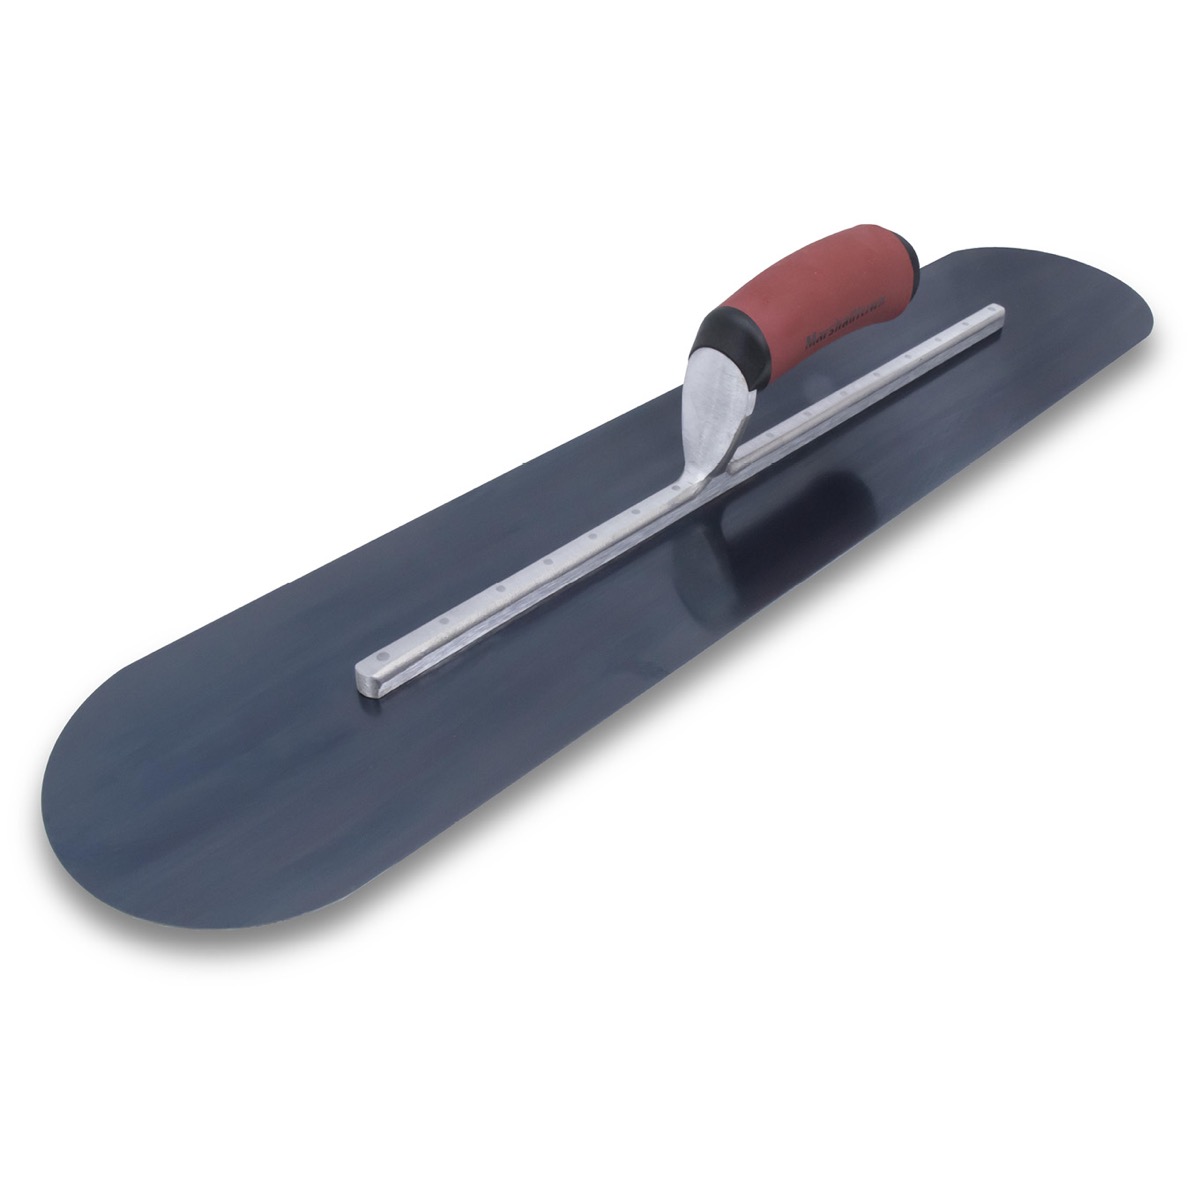 Round ends Finishing Trowel 24 x 5 inch Marshalltown